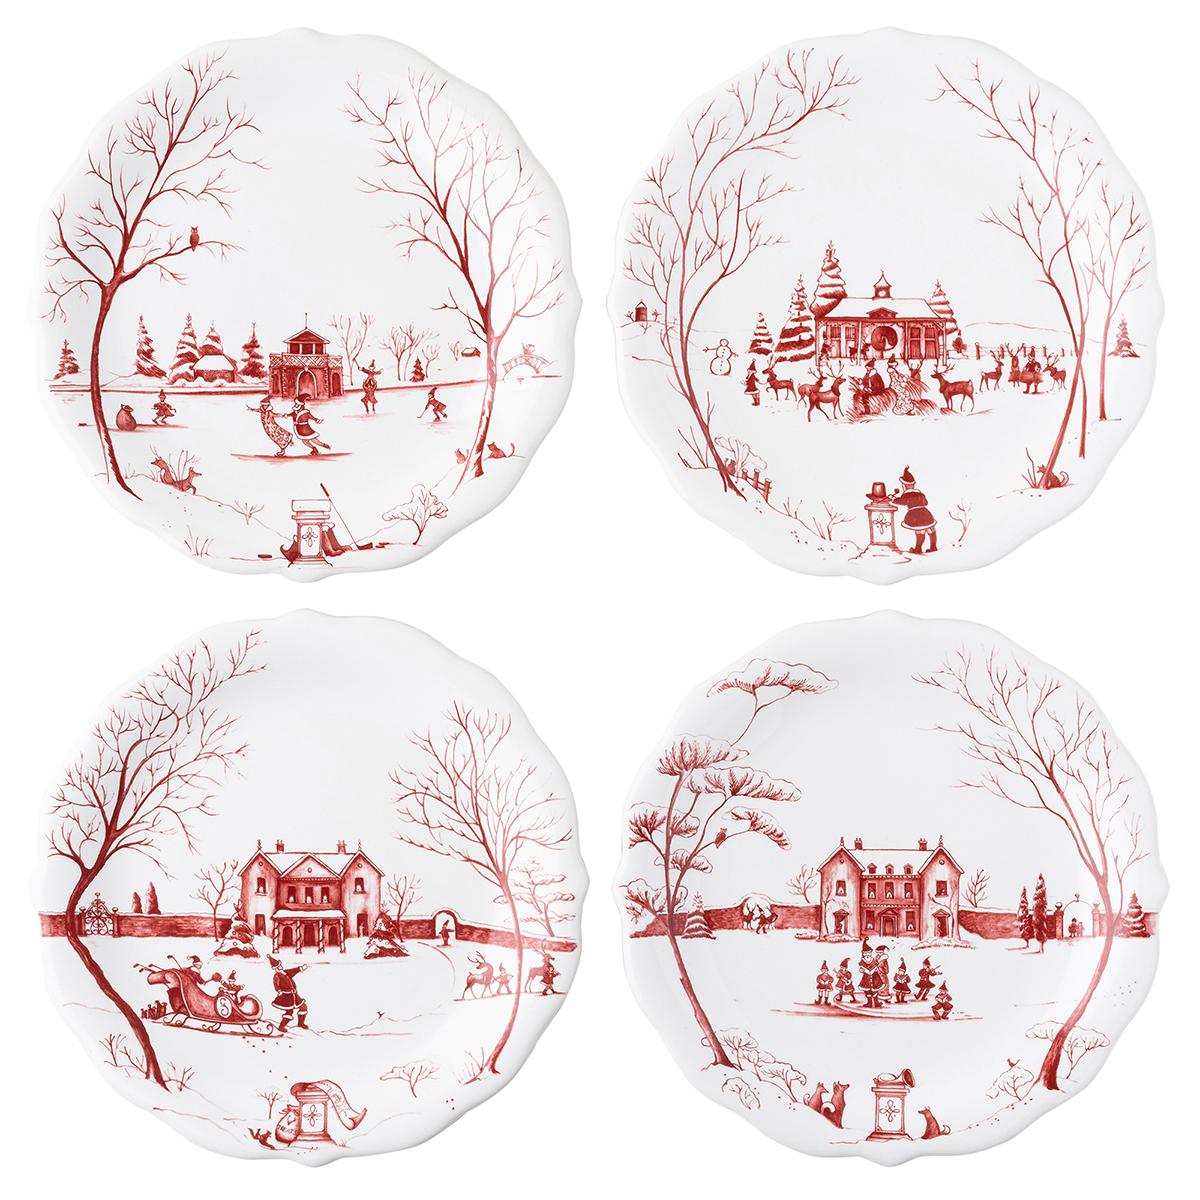 Country Estate Winter Frolic "Mr. & Mrs. Claus" Ruby Party Plates - Set of 4